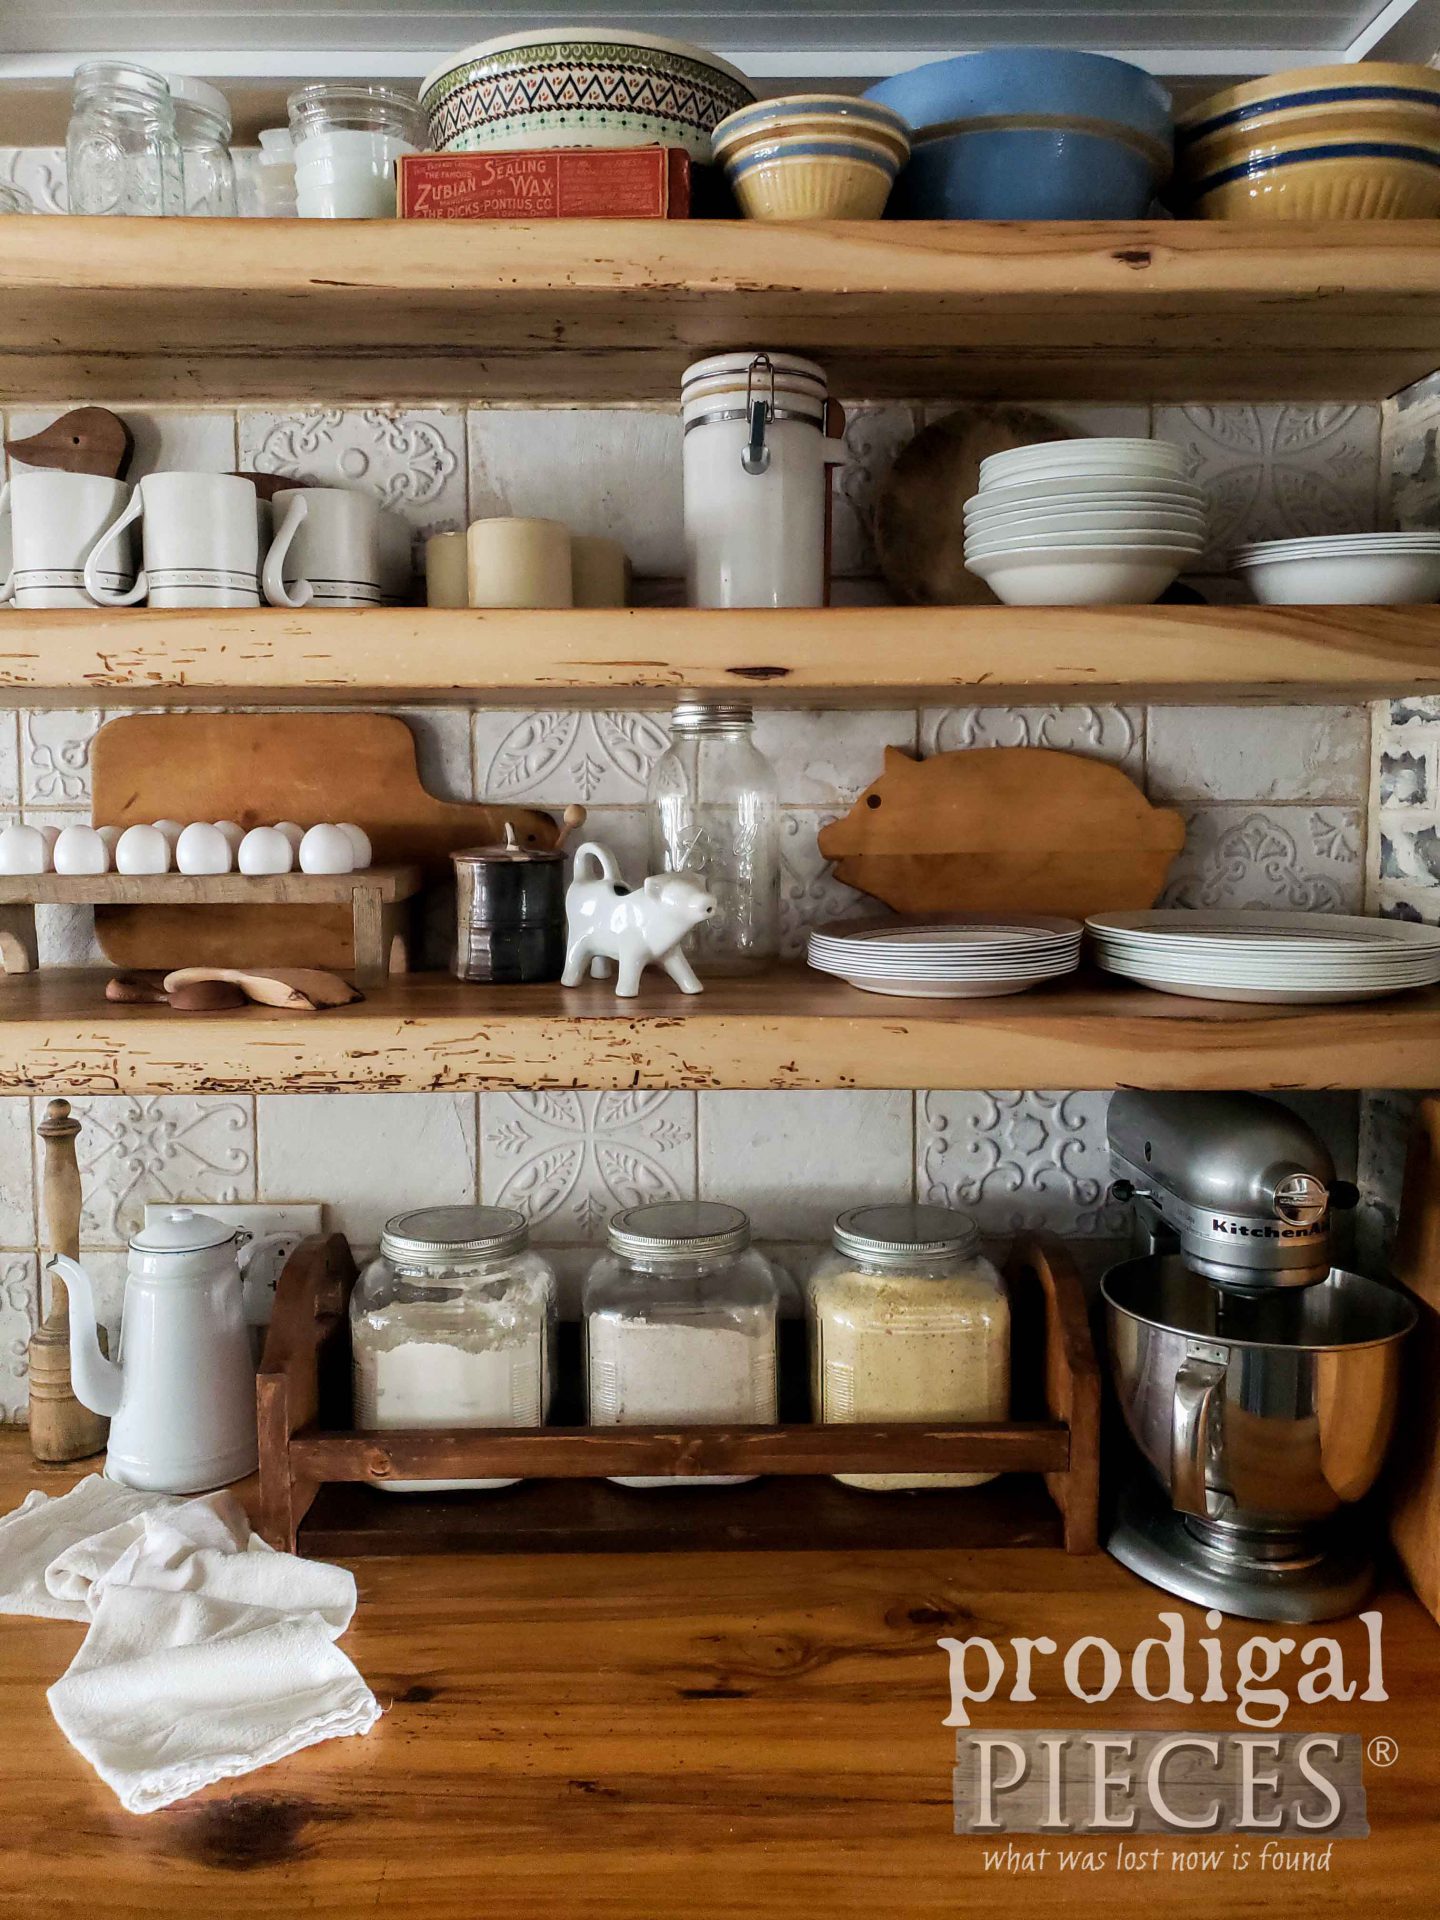 Farmhouse Kitchen Open Shelving & Counters Made from Upcycled Wooden Signs by Larissa of Prodigal Pieces | prodigalpieces.com #prodigalpieces #farmhouse #kitchen #home #diy #homedecor